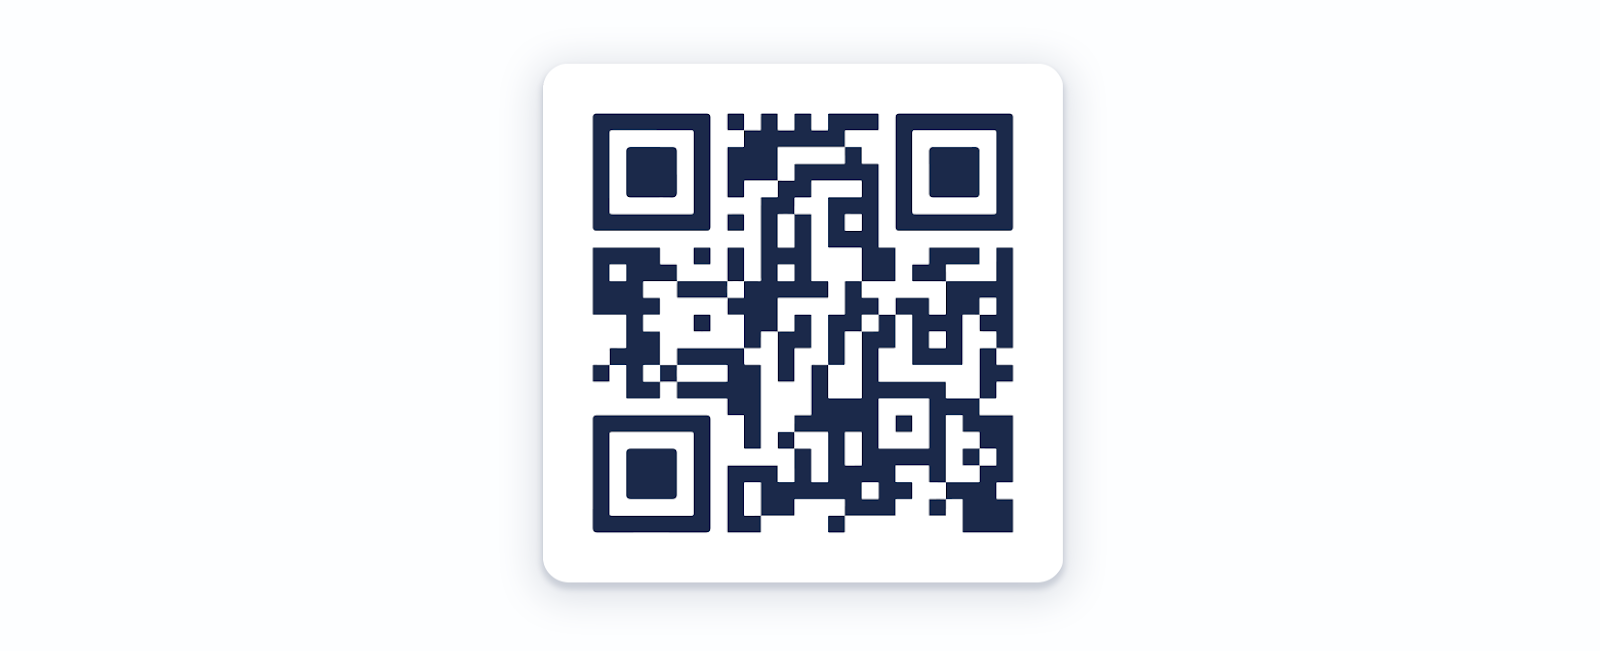 An example of a QR Code with basic structure